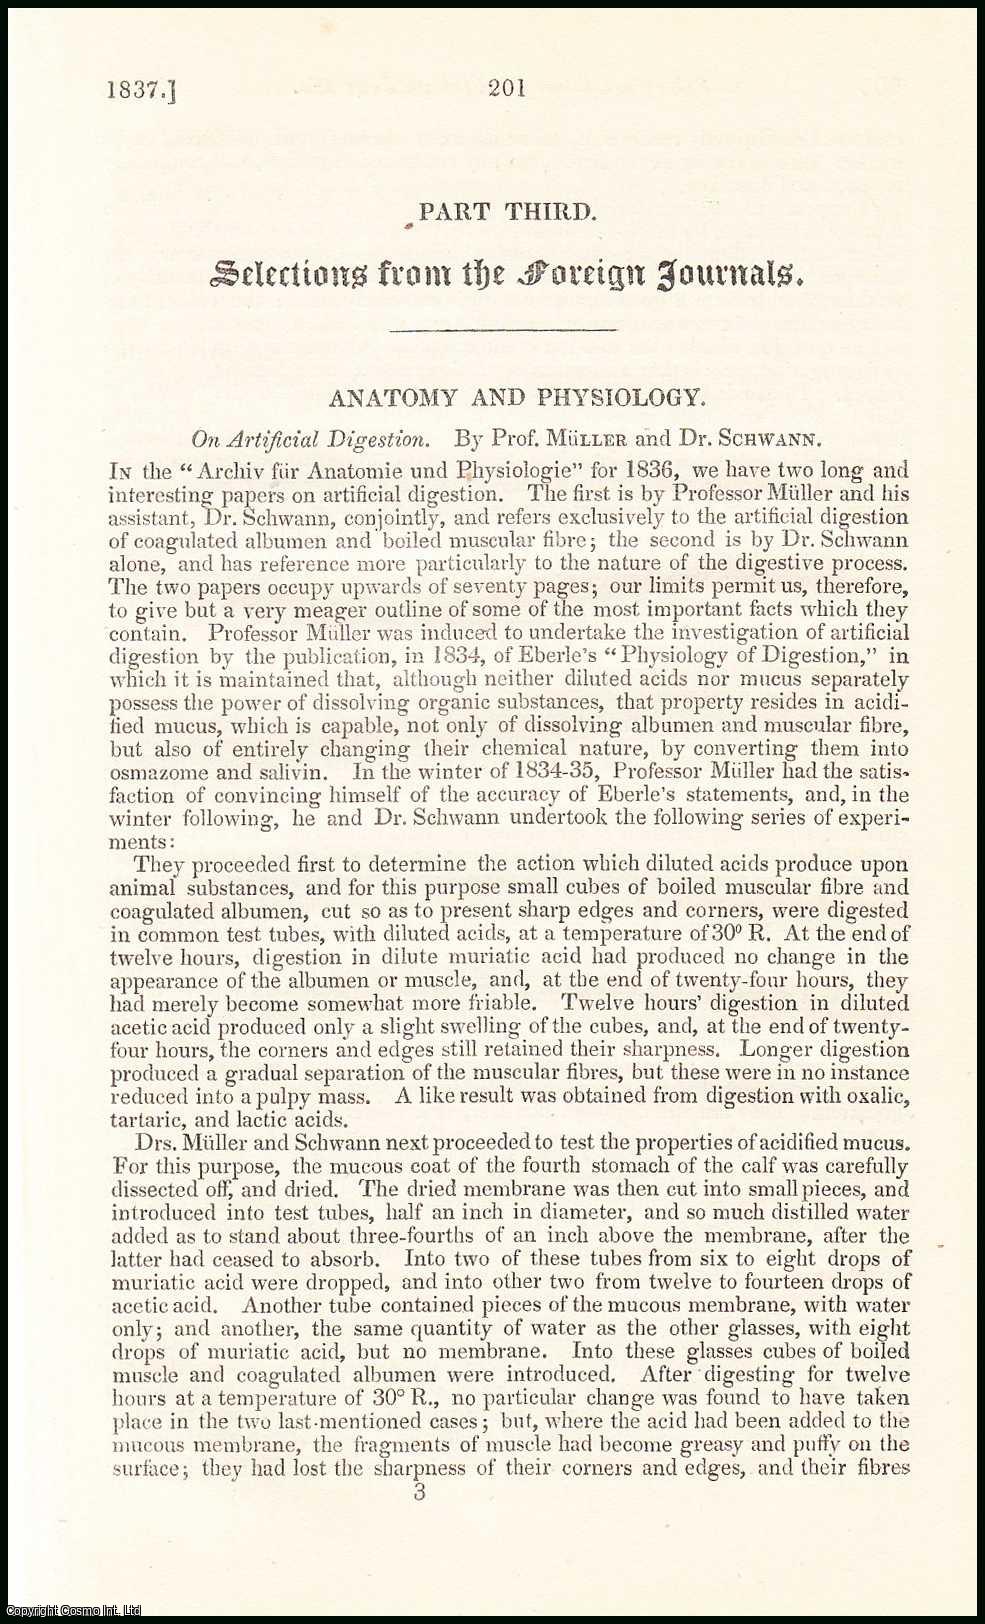 Edited by Sir John Forbes & John Conolly - Artificial Digestion, by Prof. Muller & Dr. Schwann. An original essay from the British & Foreign Medical Review, 1837. No author is given for this article.